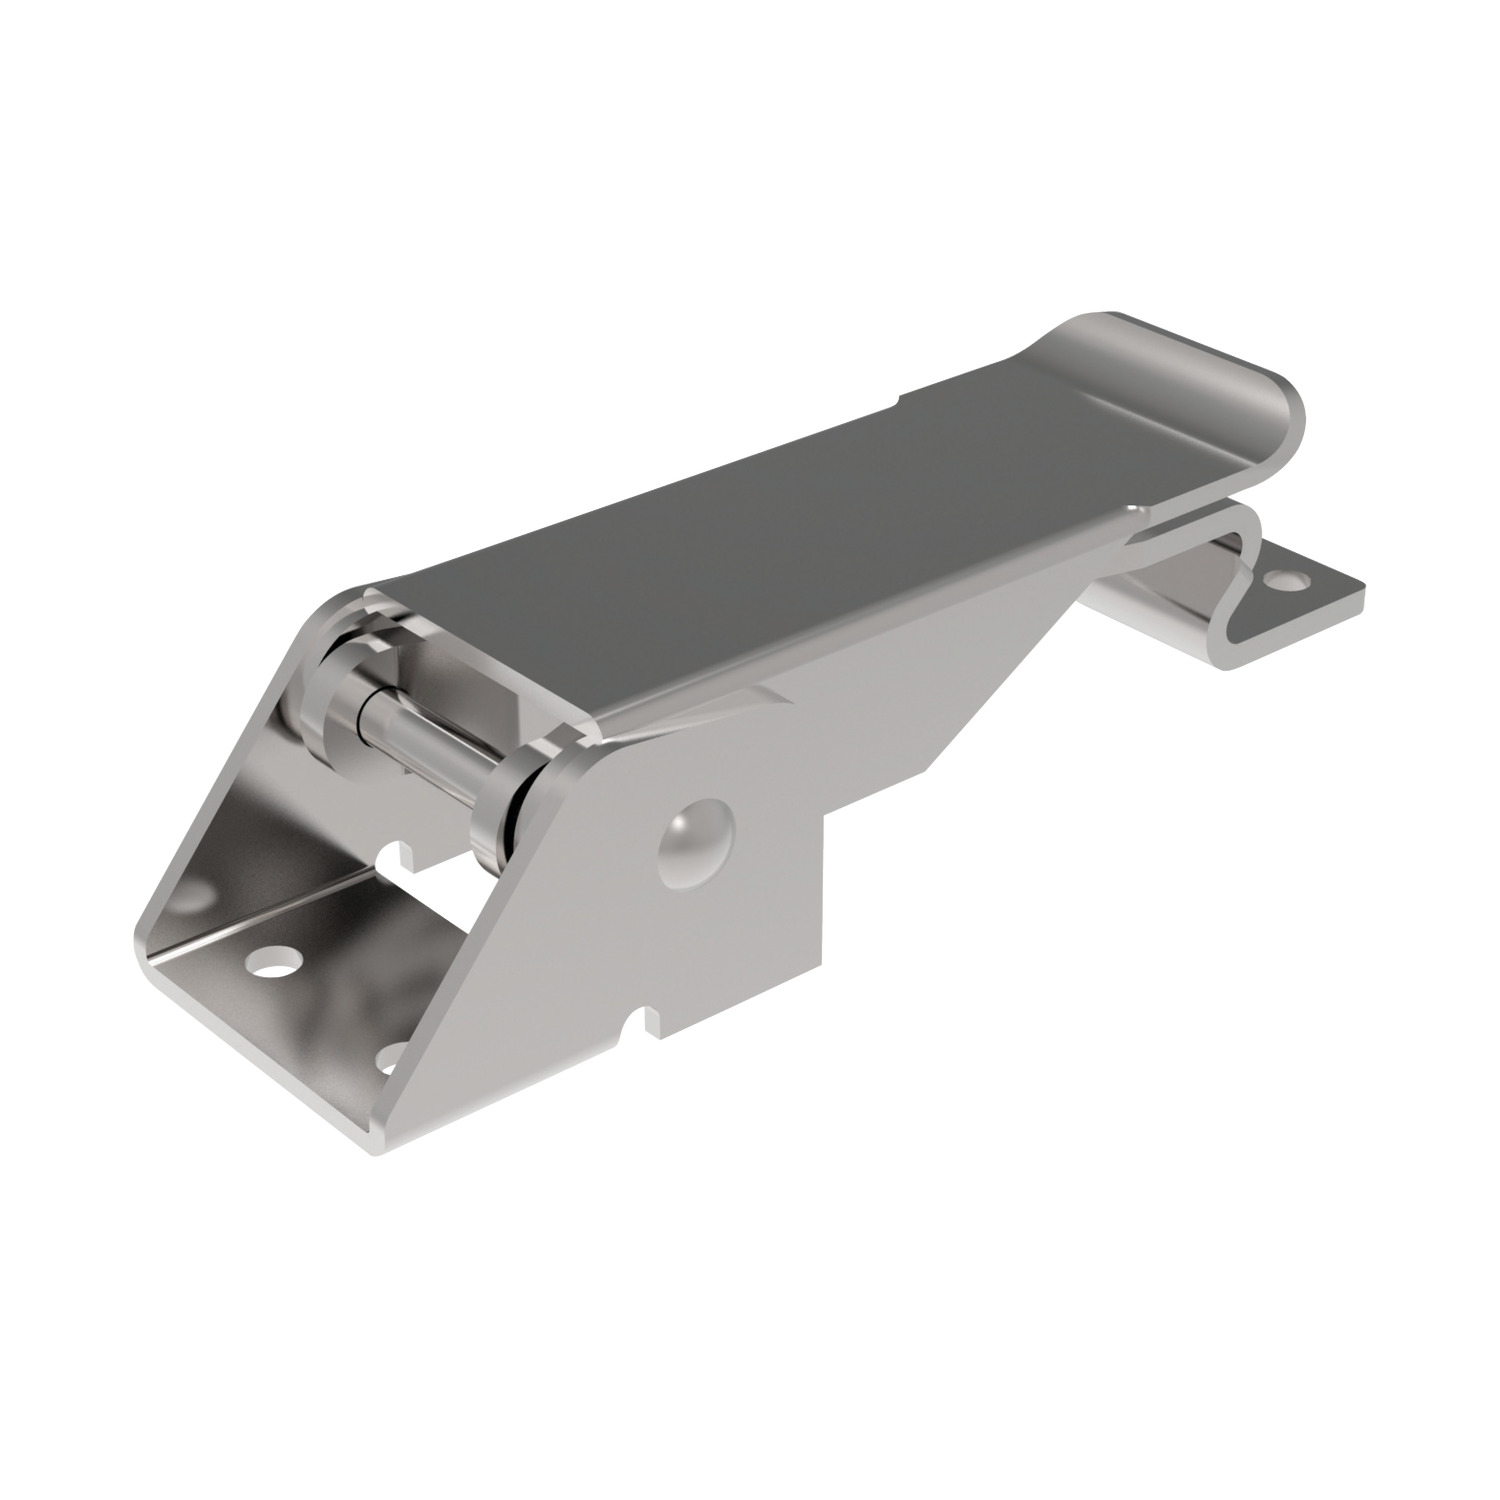 Toggle Latches Made from Nickel plated steel. This adjustable toggle latch is adjustable through turns of threaded draw rod.